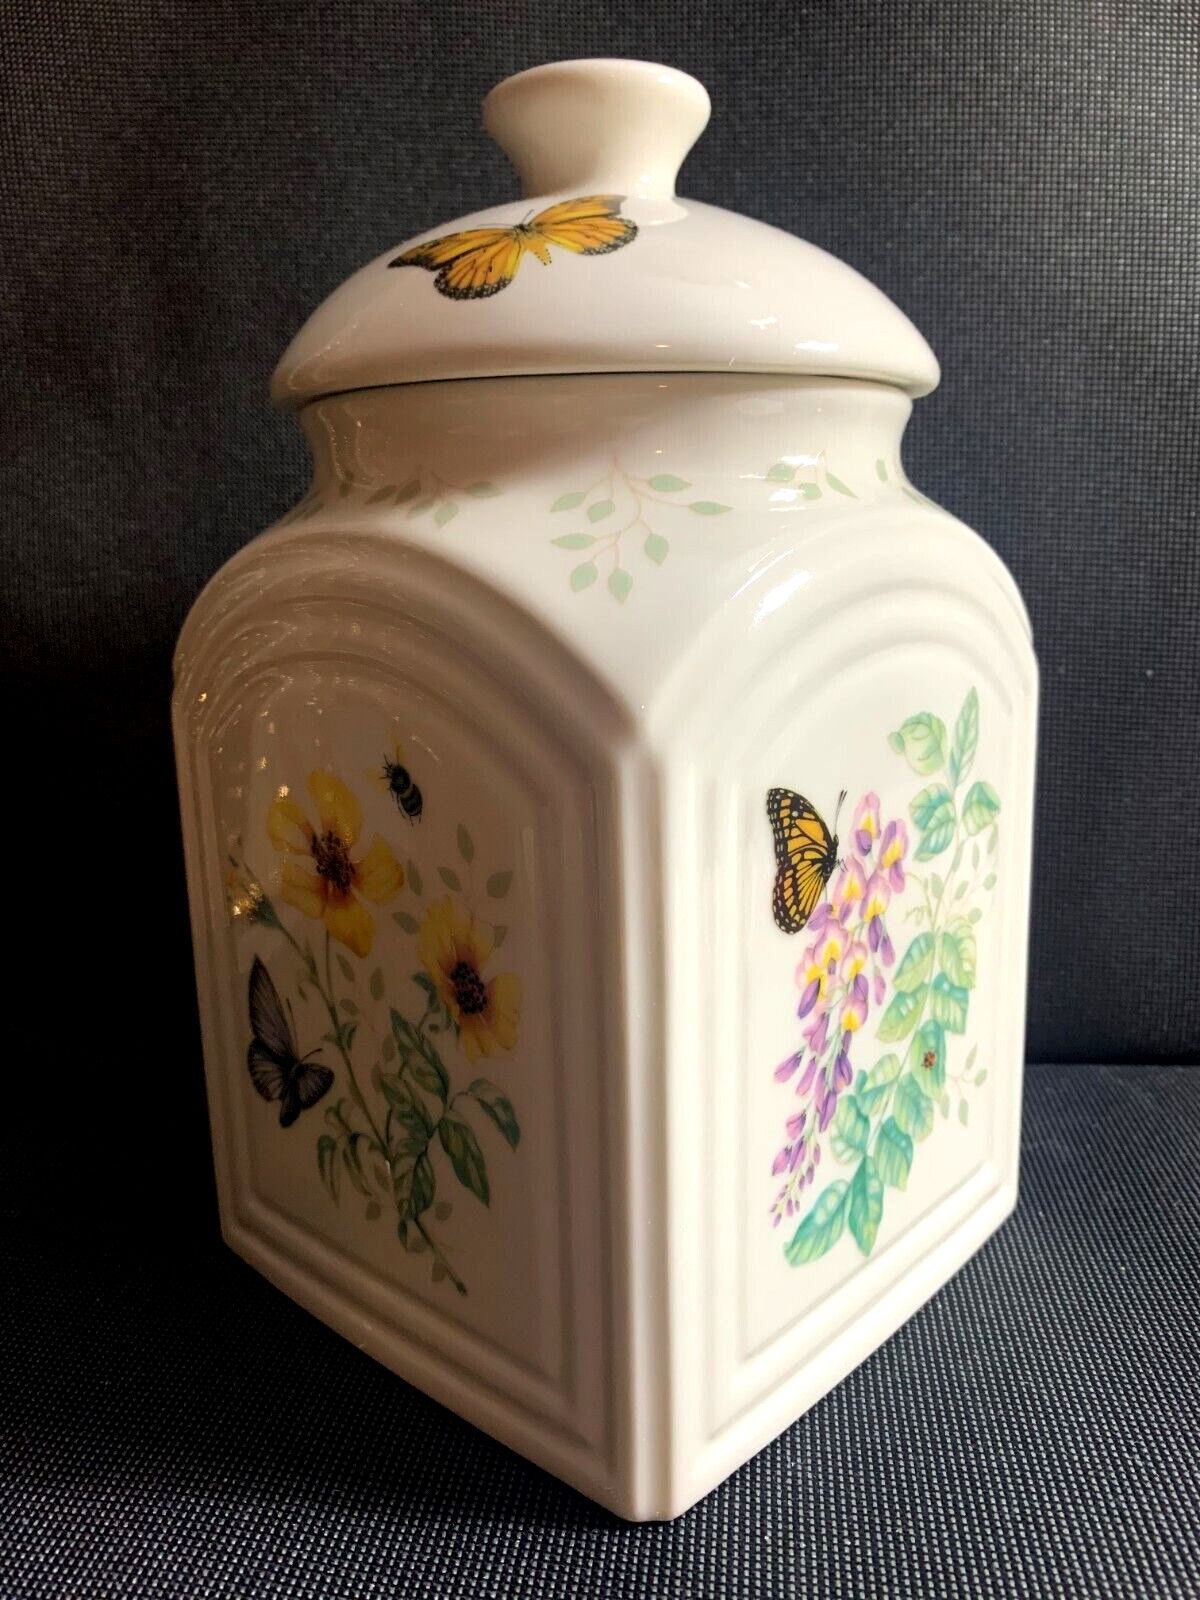 LENOX BUTTERFLY MEADOW 84 OZ MEDIUM SIZE PORCELAIN CANISTER WITH LID NEW